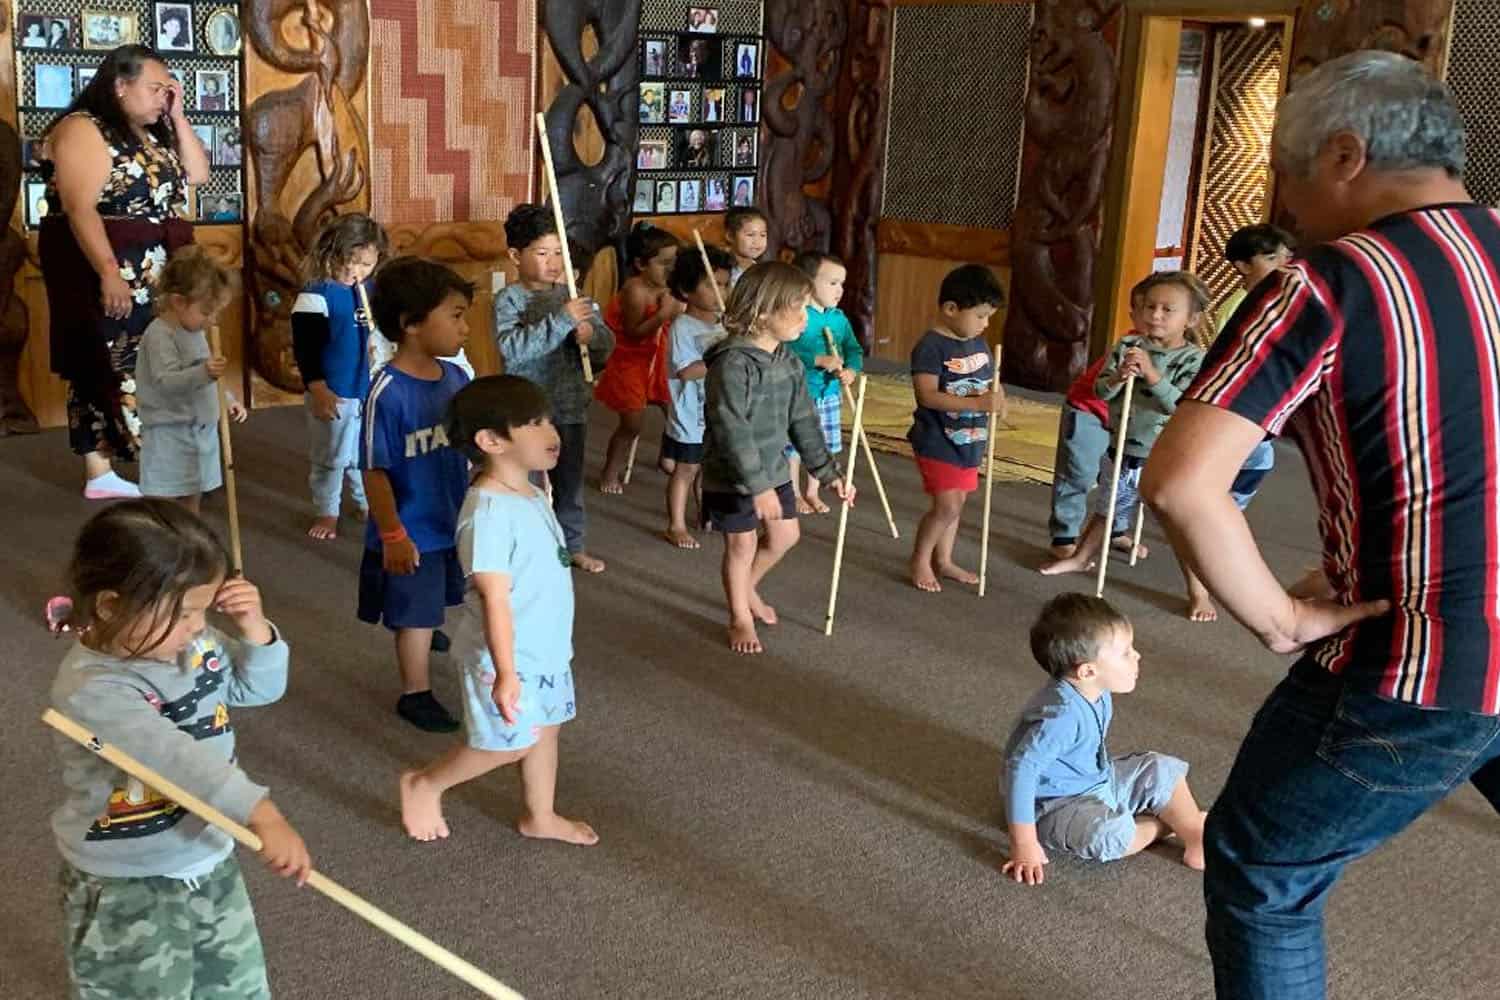 Children supported in their Maori cultural development - learning a haka.